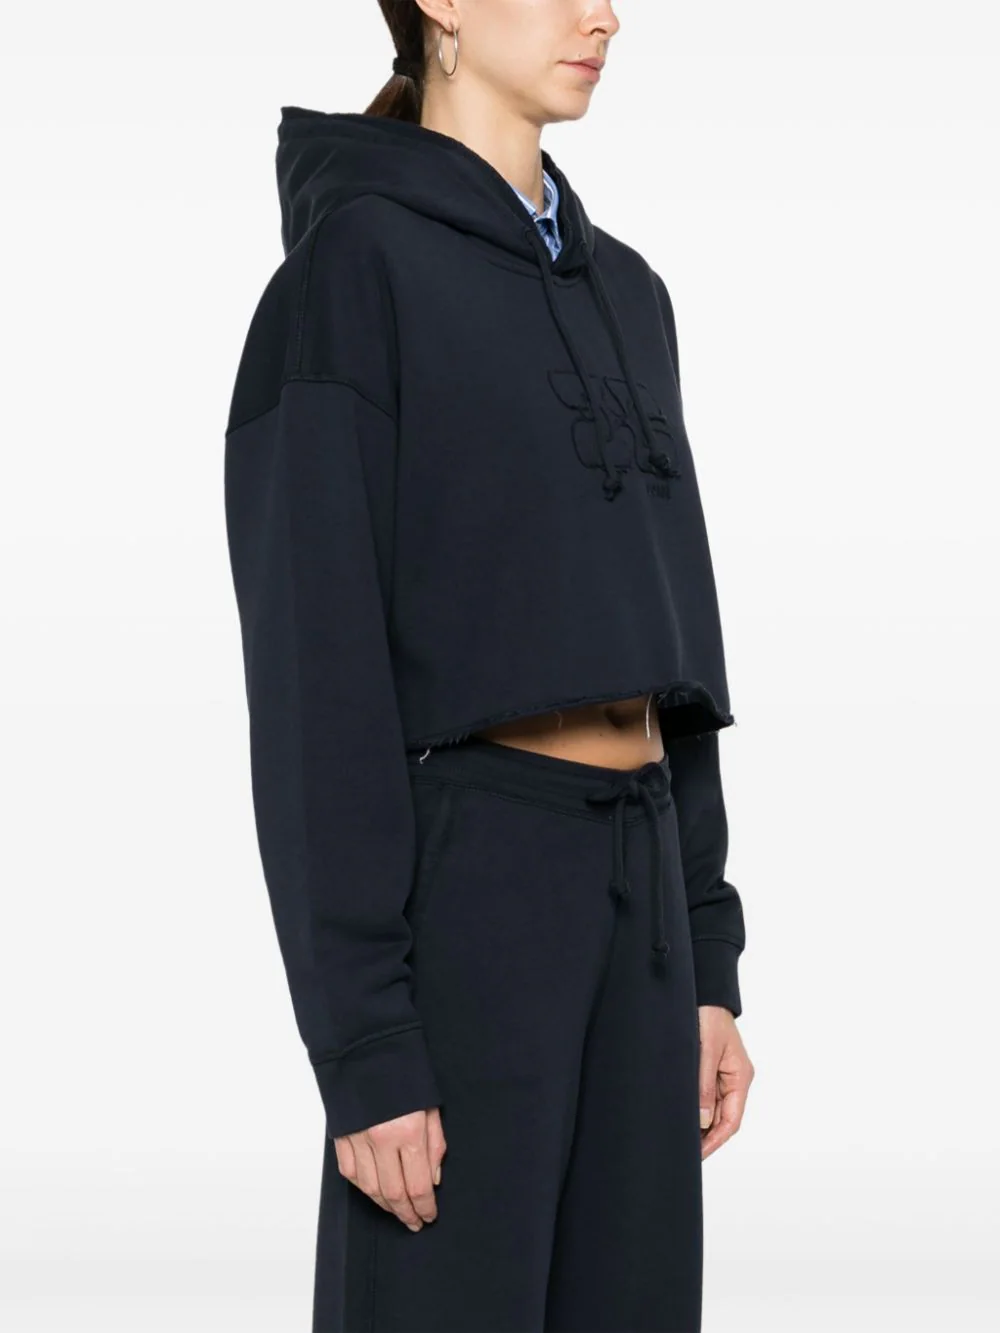 Isoli Cropped Oversized Hoodie